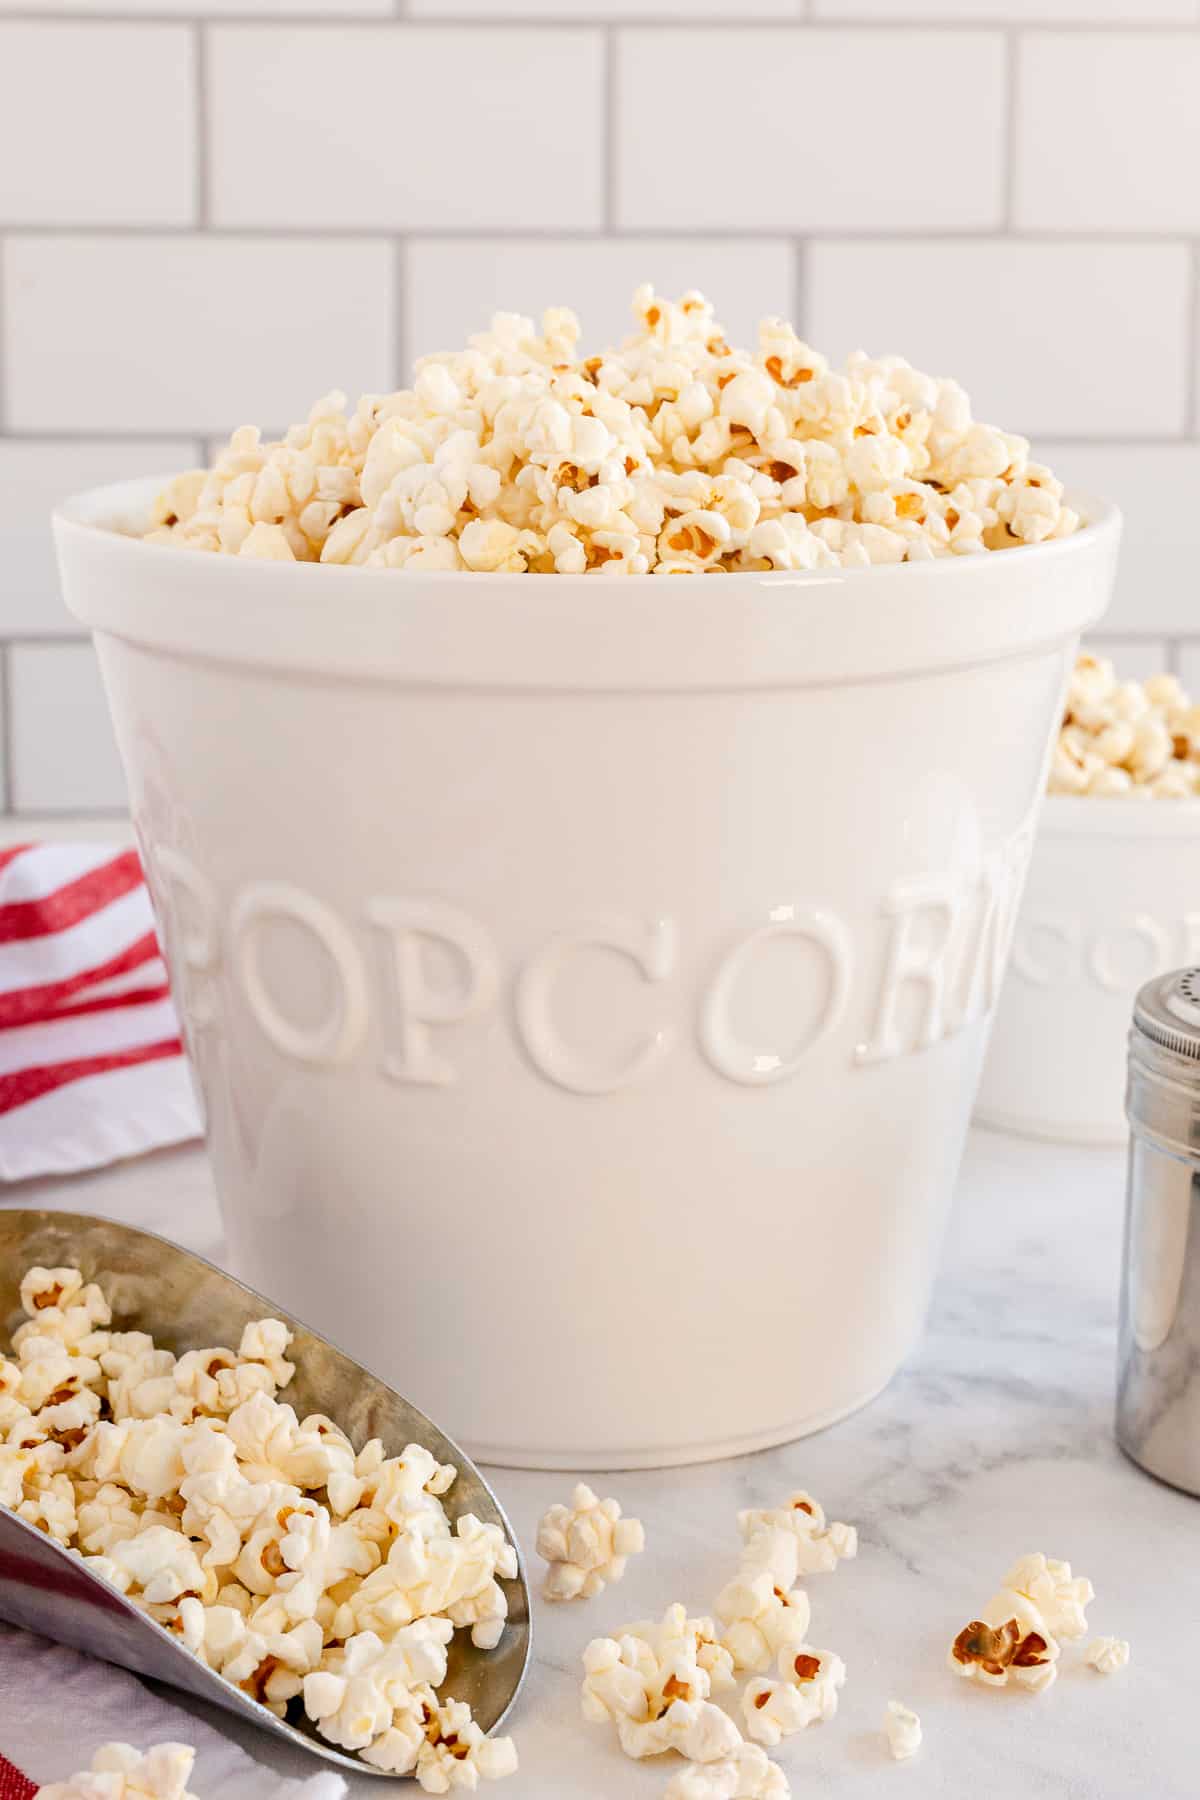 A metal scoop and a tall white bowl filled with popcorn.